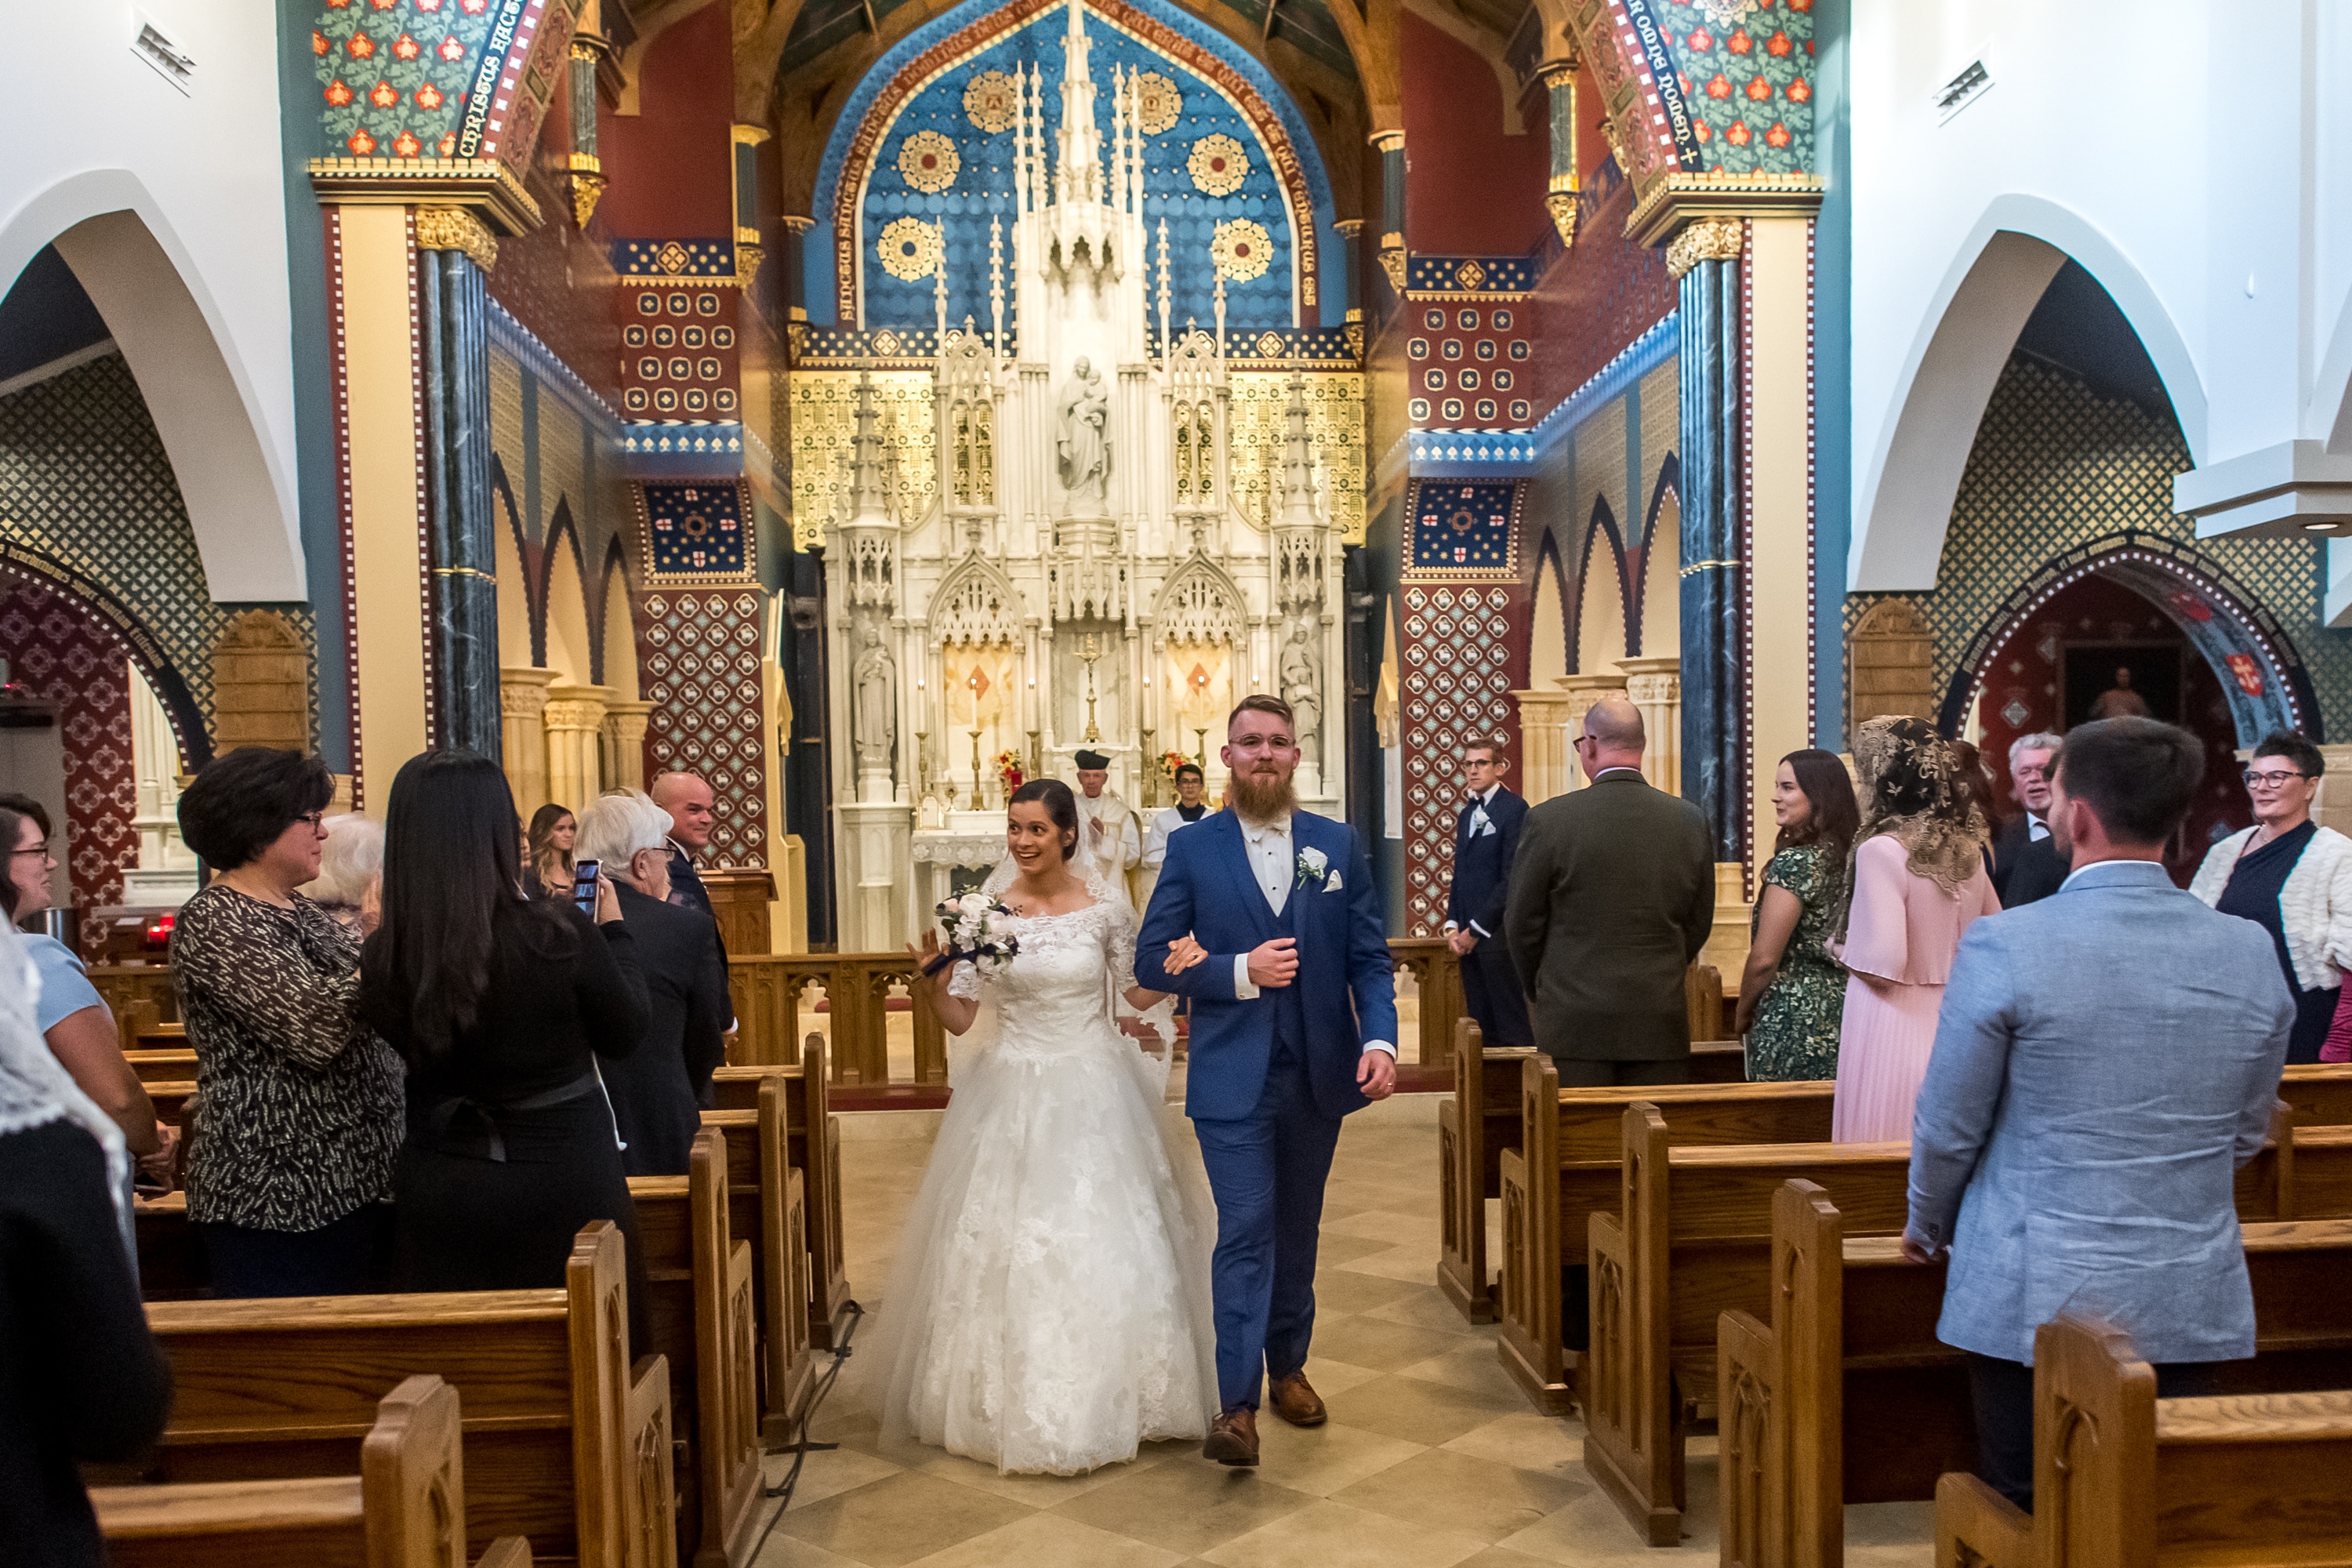 Bride and groom walk down the aisle after a wedding at Our Lady of Mt. Carmel in Littleton, Colorado.